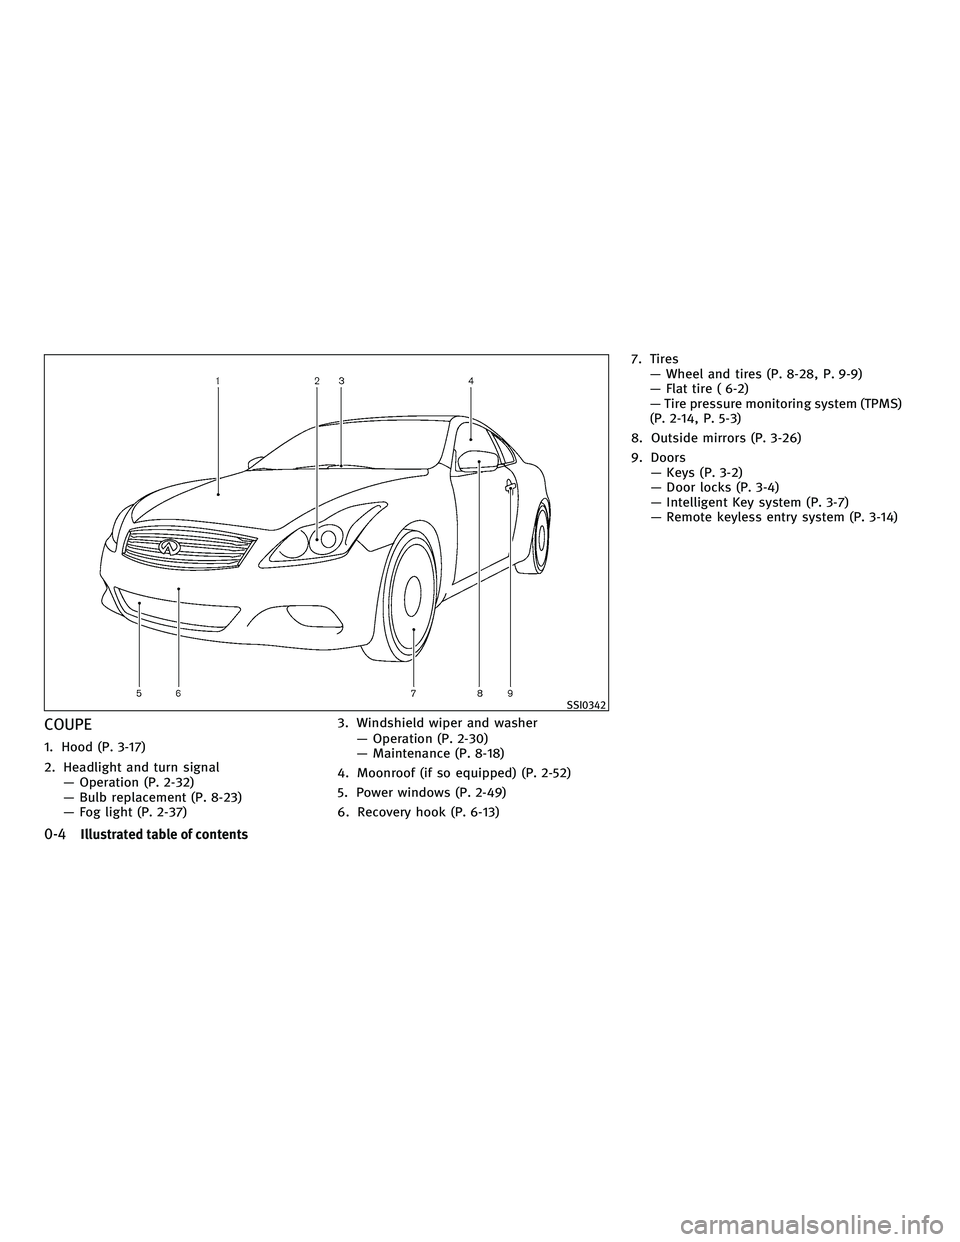 INFINITI G 2010 User Guide COUPE
1. Hood (P. 3-17)
2. Headlight and turn signal— Operation (P. 2-32)
— Bulb replacement (P. 8-23)
— Fog light (P. 2-37) 3. Windshield wiper and washer
— Operation (P. 2-30)
— Maintenanc